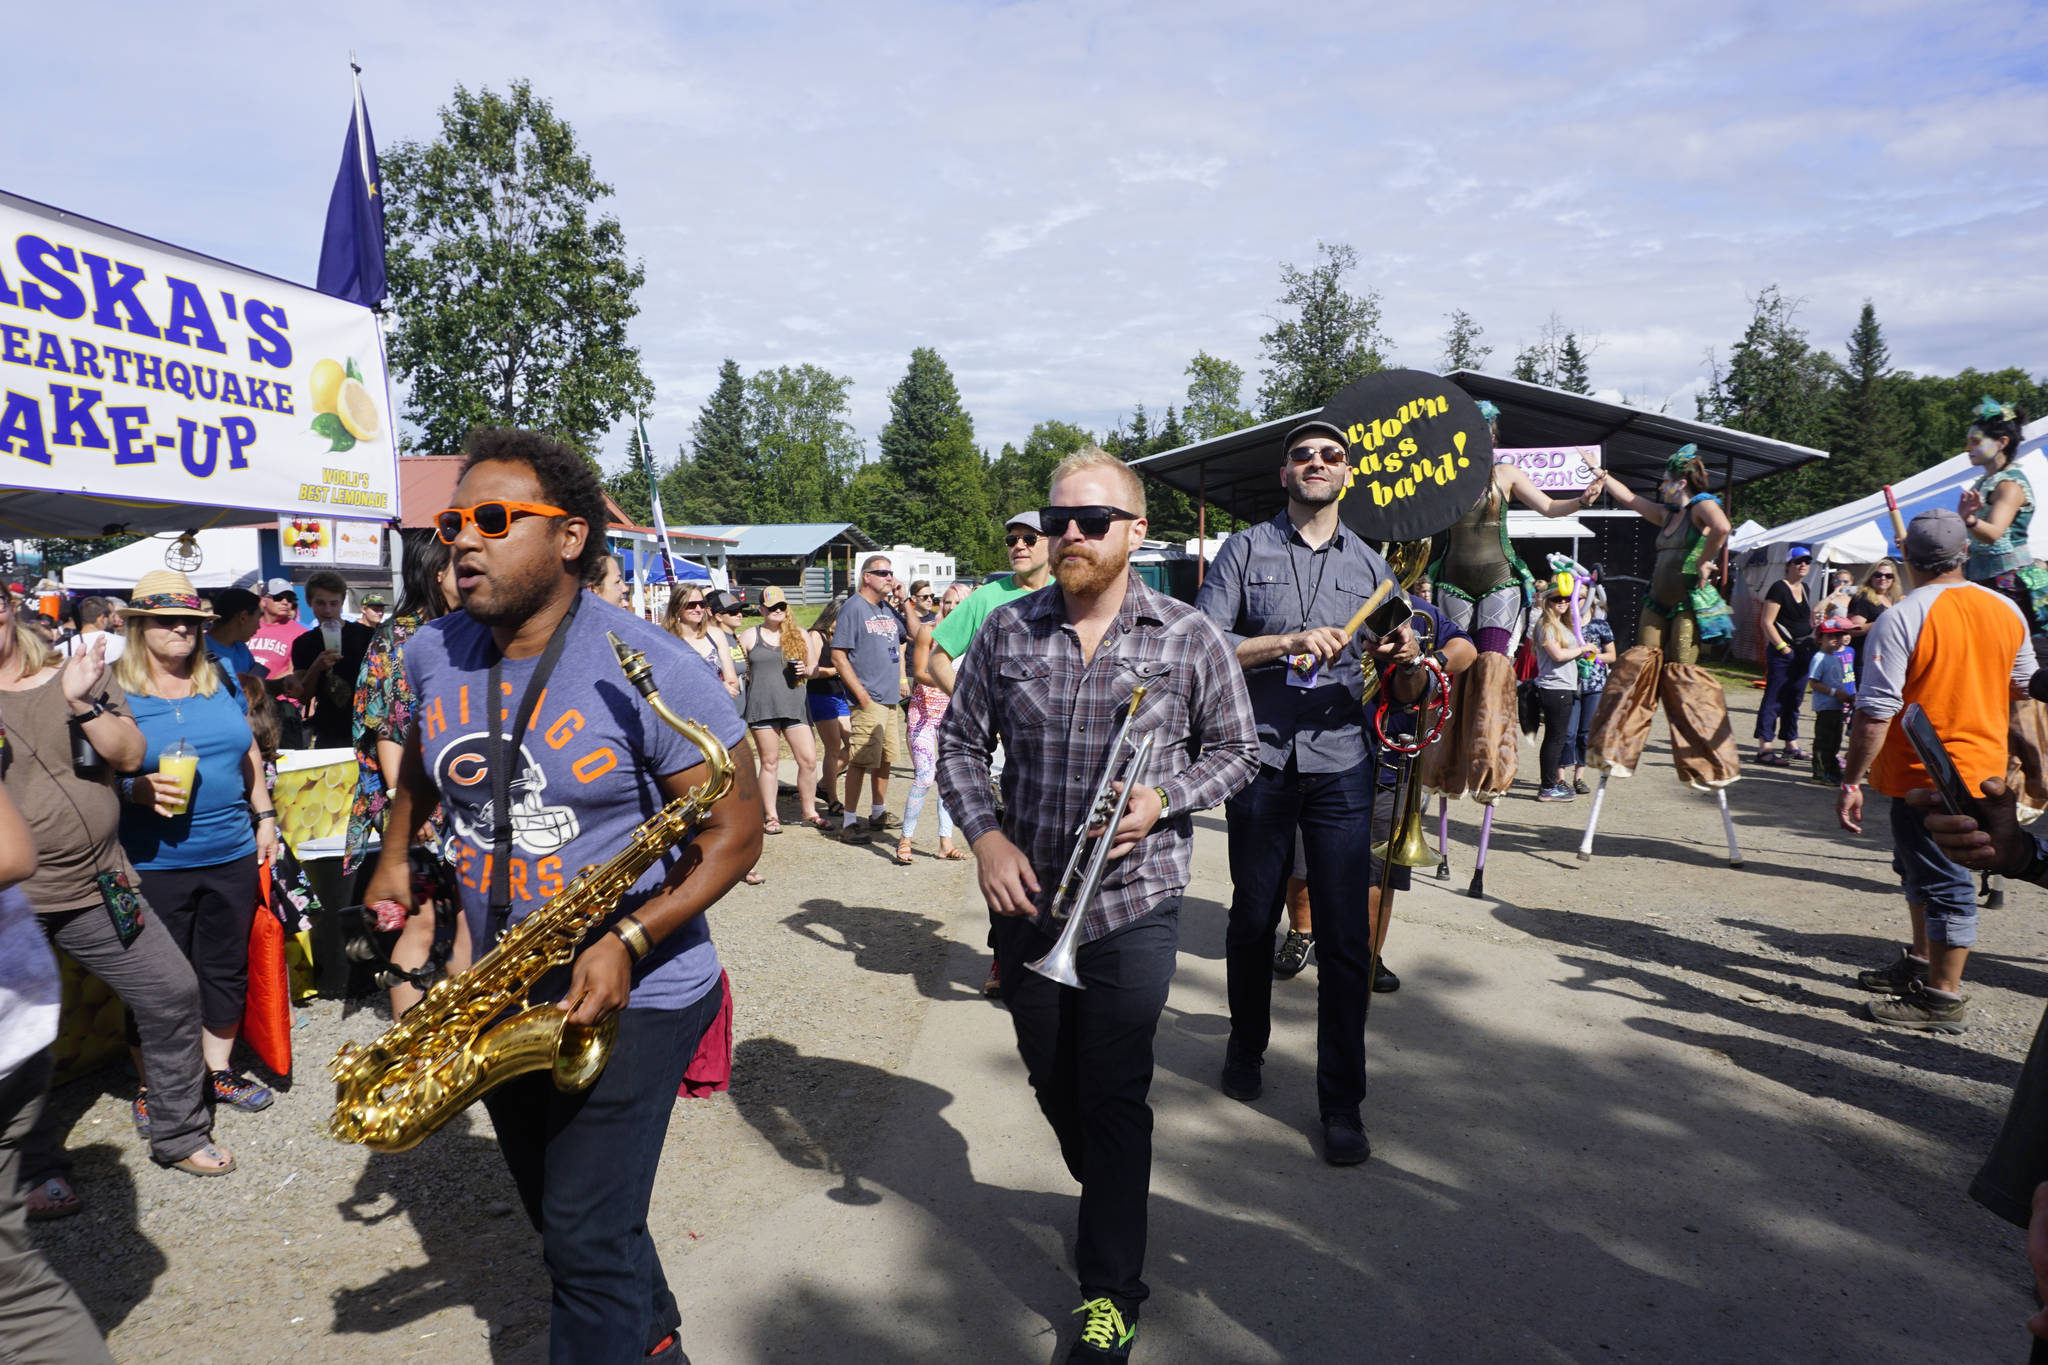 An art and music performance during Salmonfest on Saturday, Aug. 4, 2018, featured women on stilts dressed as mermaids, salmon sculptures and the LowDown Brass Band. Salmonfest attendees enjoyed warm sunny weather on Saturday at the Kenai Peninsula Fairgrounds in Ninilchik, Alaska. (Photo by Michael Armstrong/Homer News)